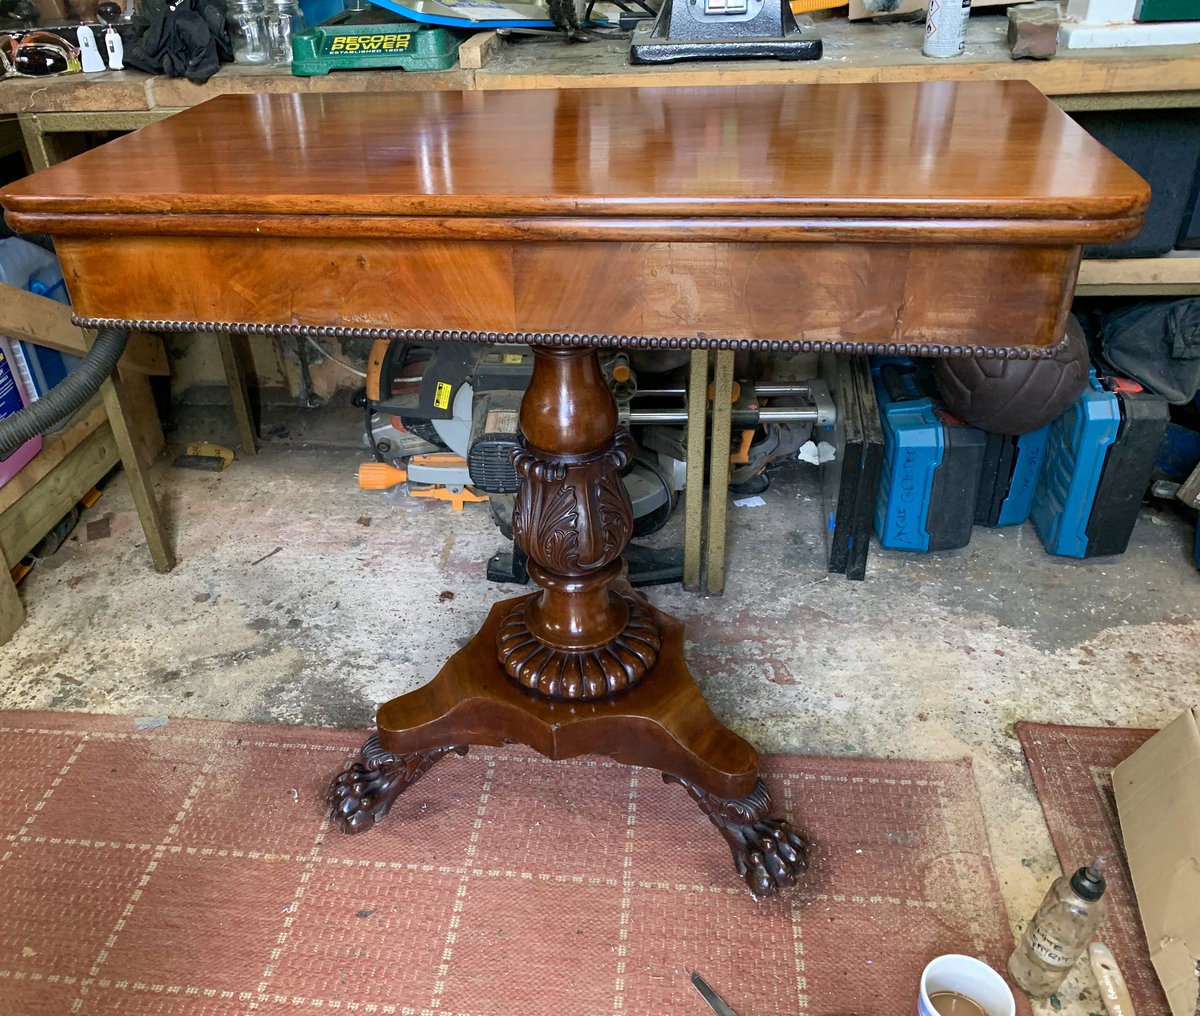 It’s been a Leg day. 😉 & a Foot day!!! Just look at those Lion paws 😳 #restoration #antique #antiquefurniture #antiquefurniturerestoration #workshop